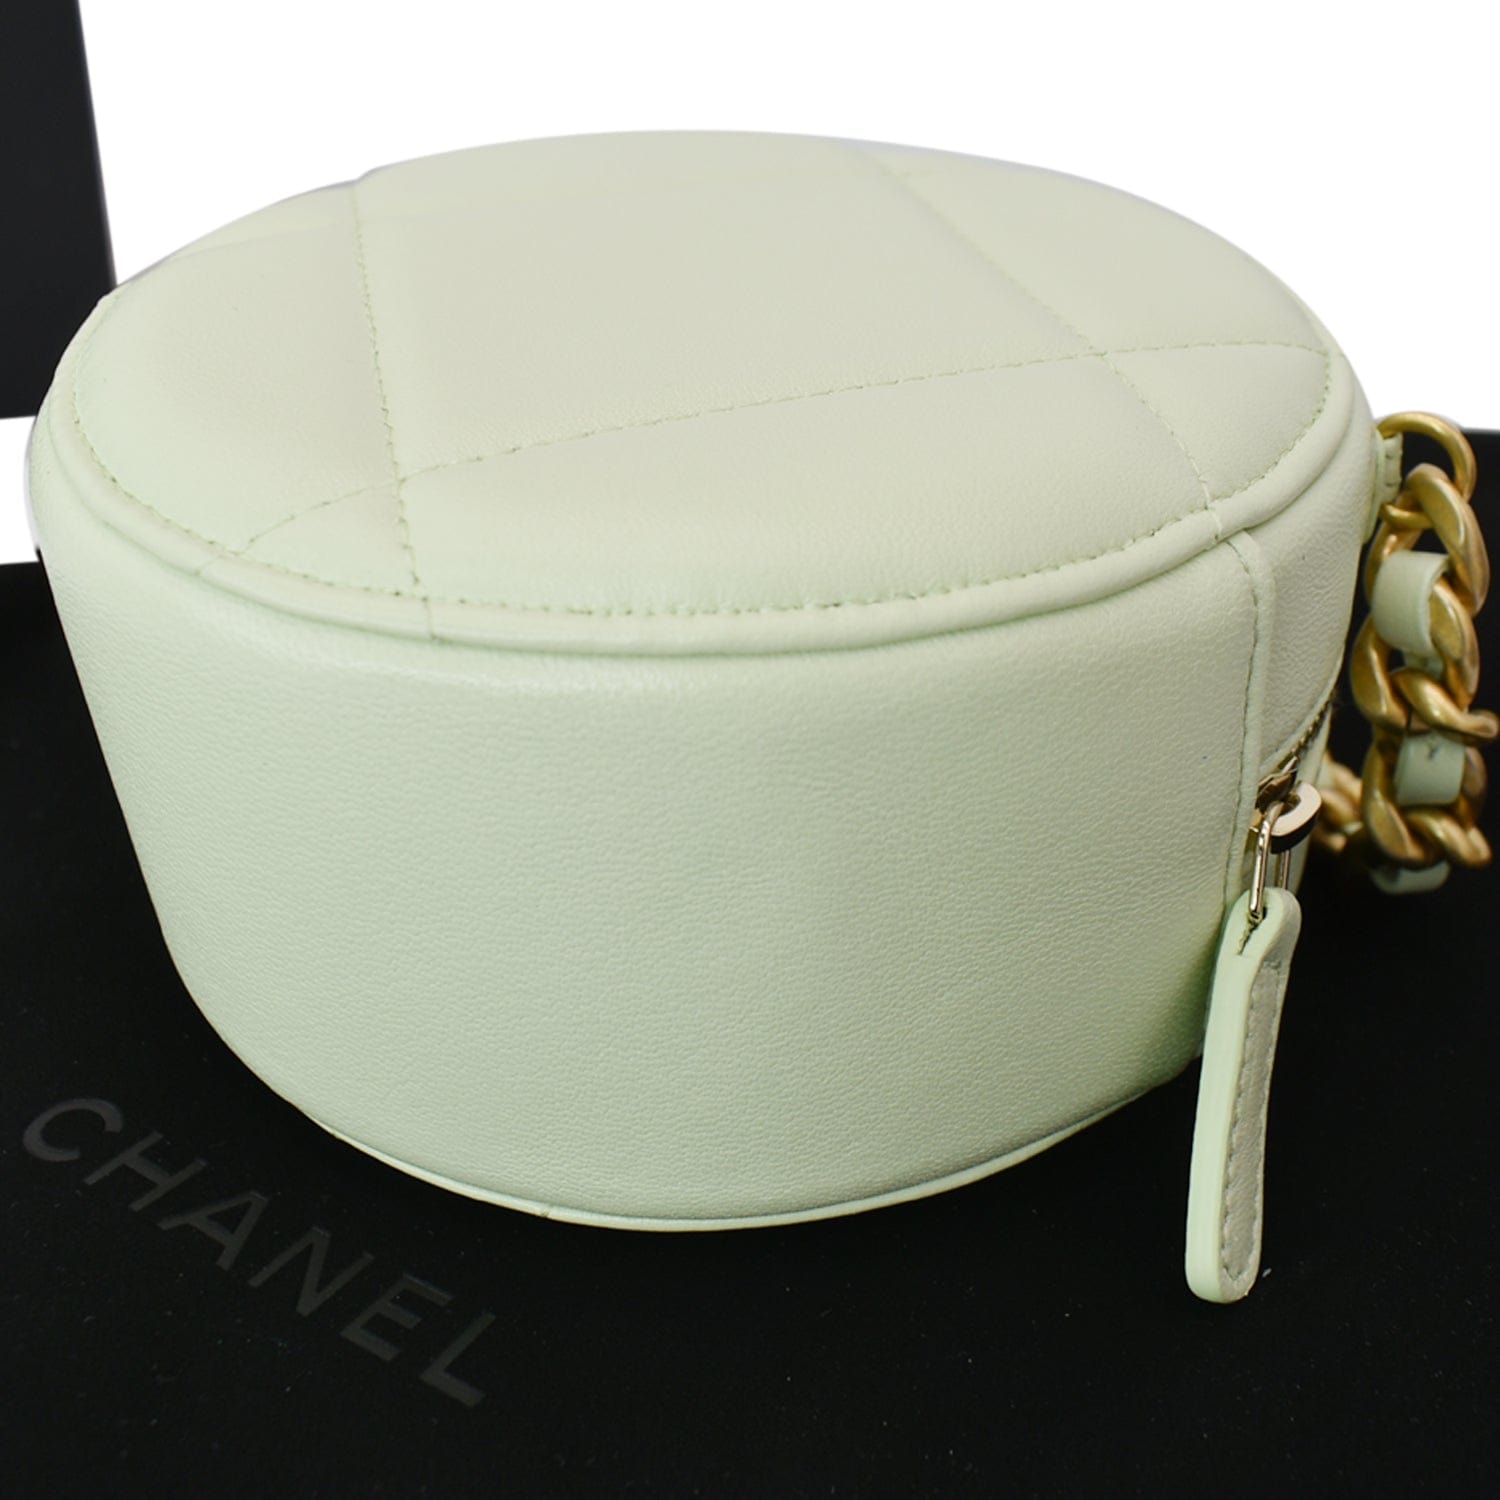 CHANEL 19 Round Clutch Chain Shoulder Bag Leather Green AP0945